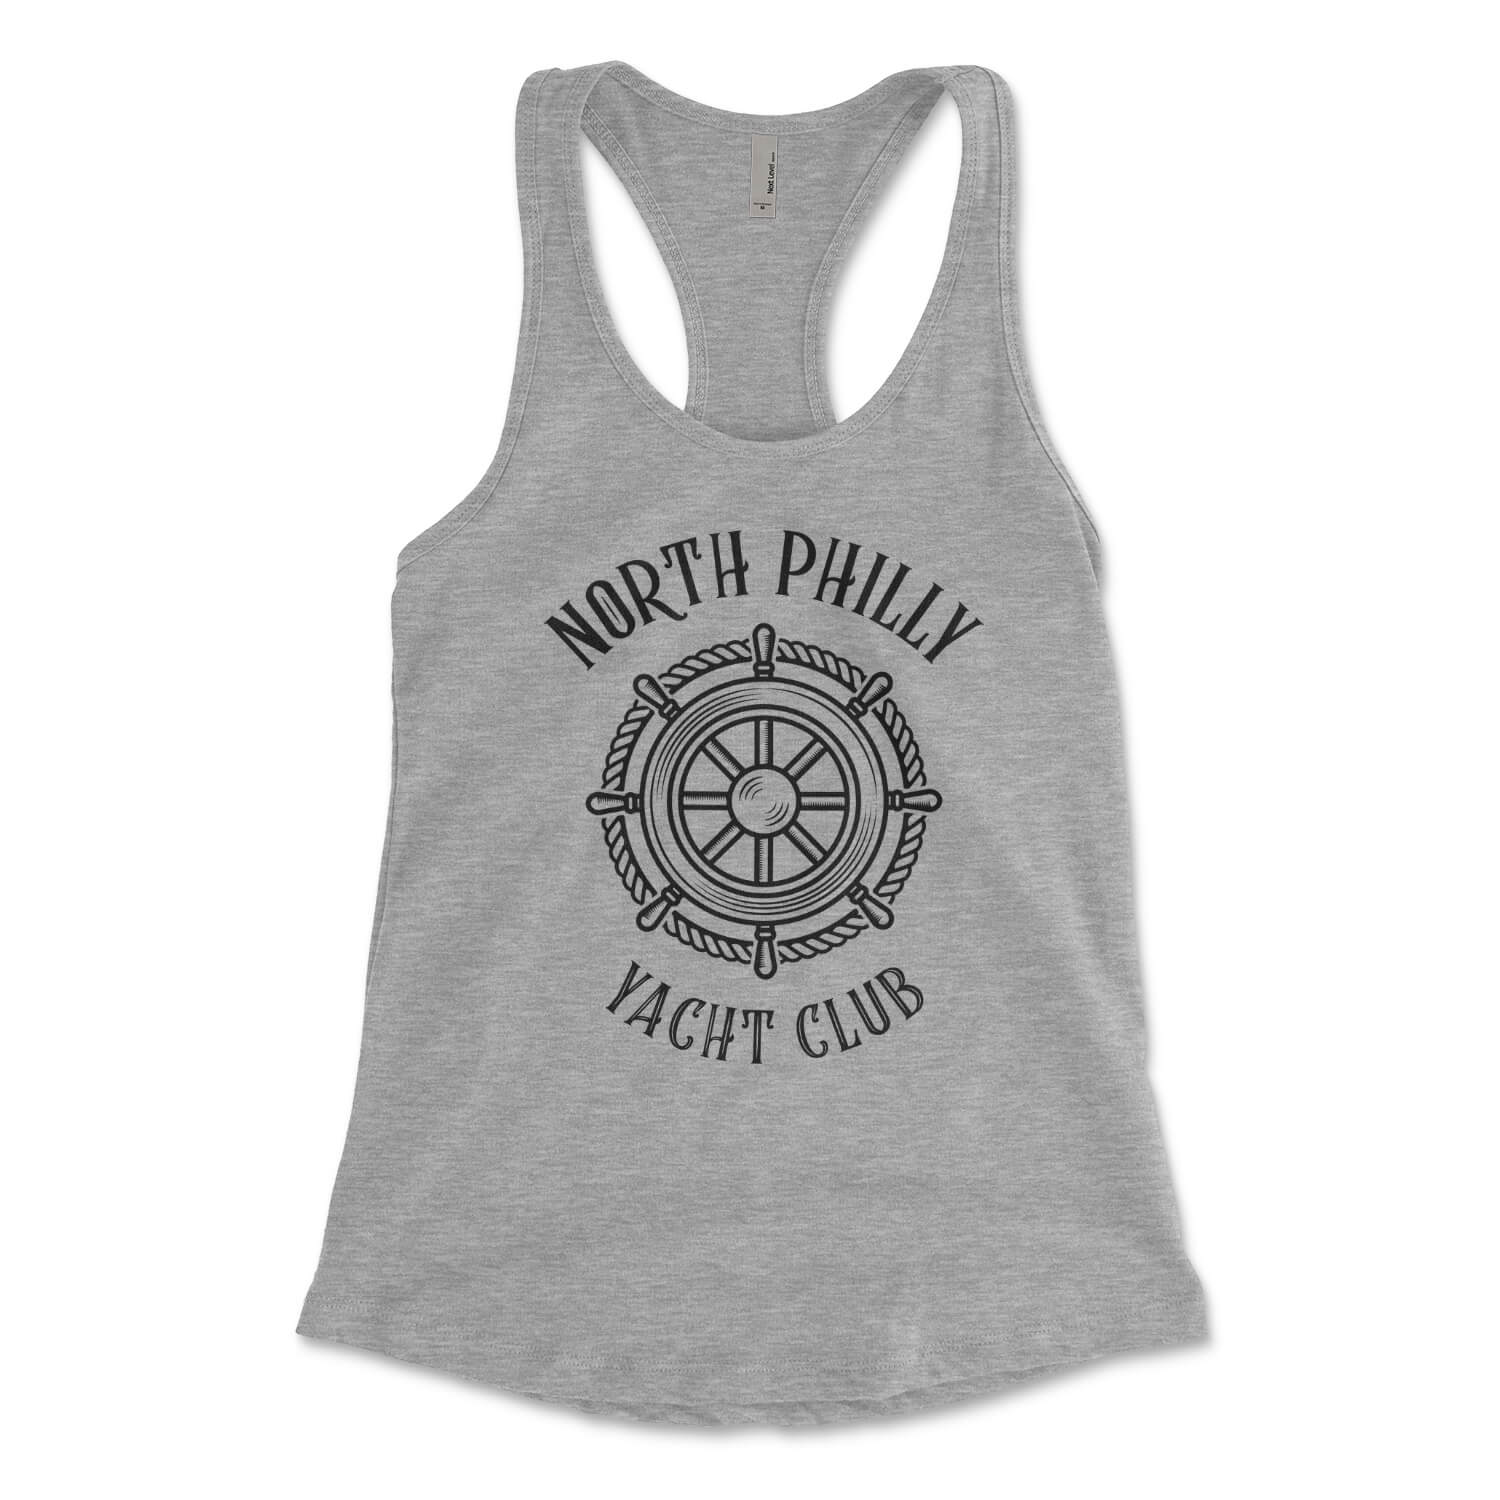 North Philly Yacht Club heather grey womens racerback tank top from Phillygoat